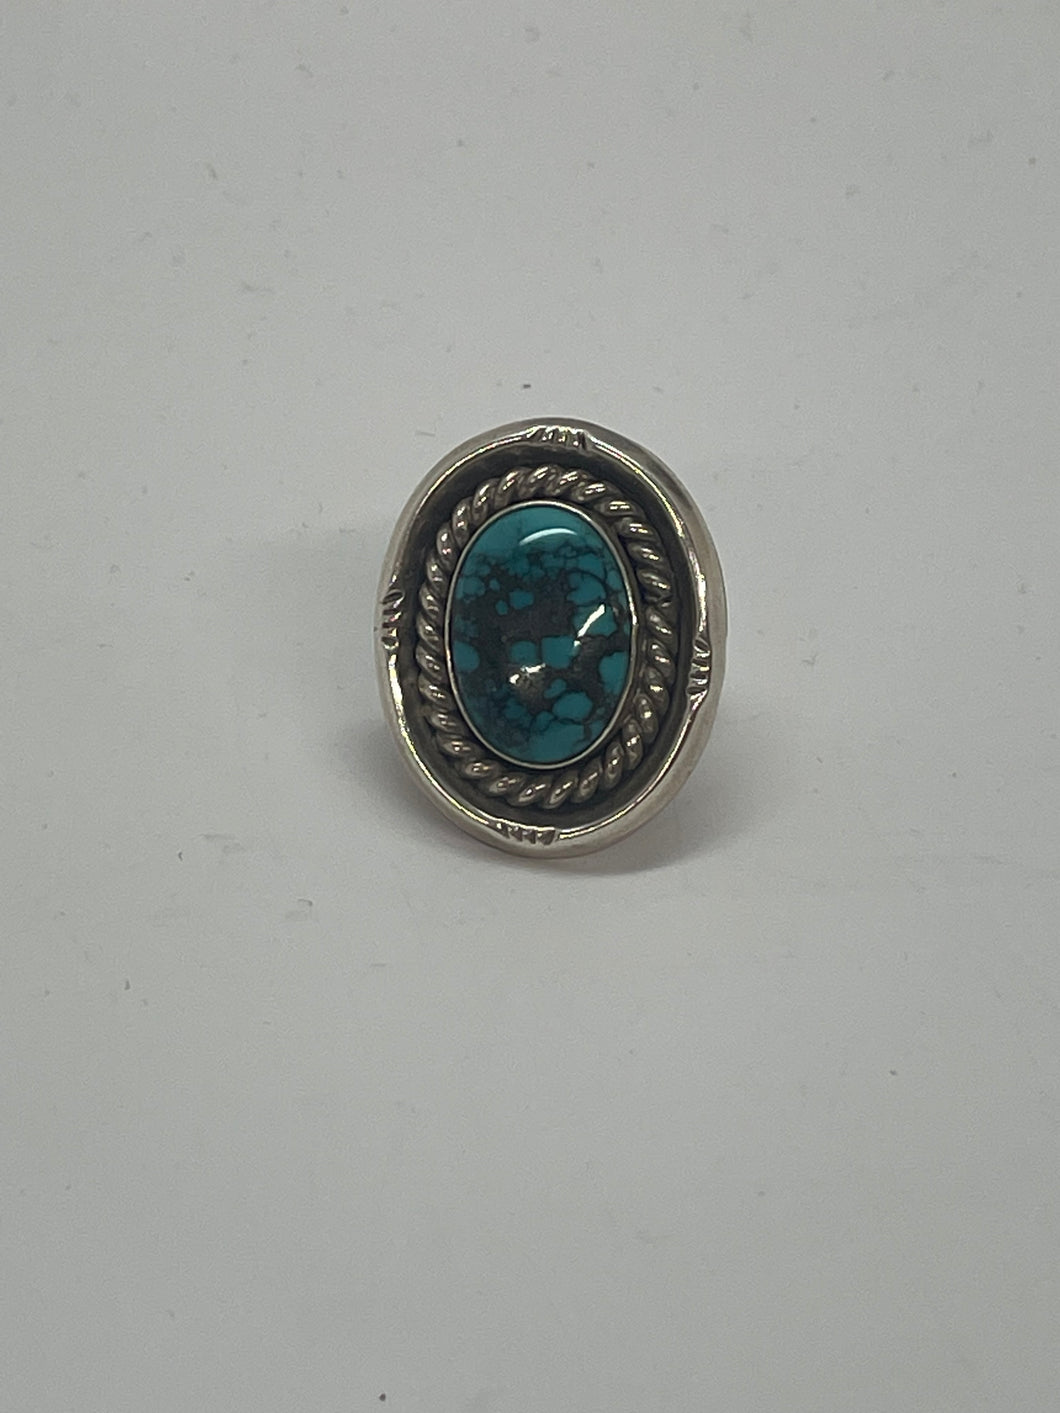 Native American Turquoise Ring